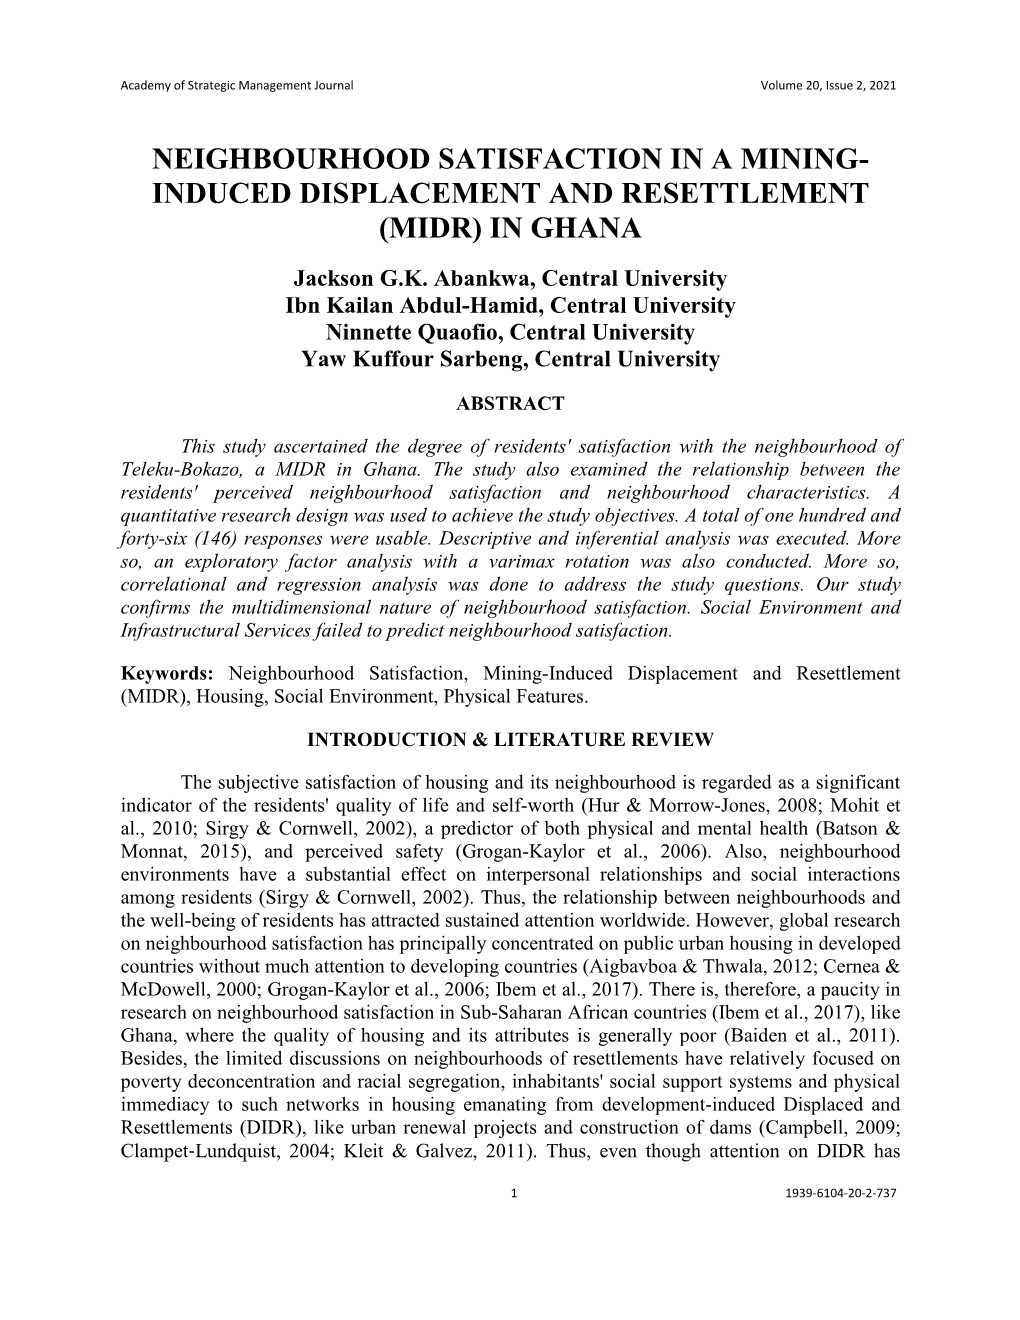 INDUCED DISPLACEMENT and RESETTLEMENT (MIDR) in GHANA Jackson G.K